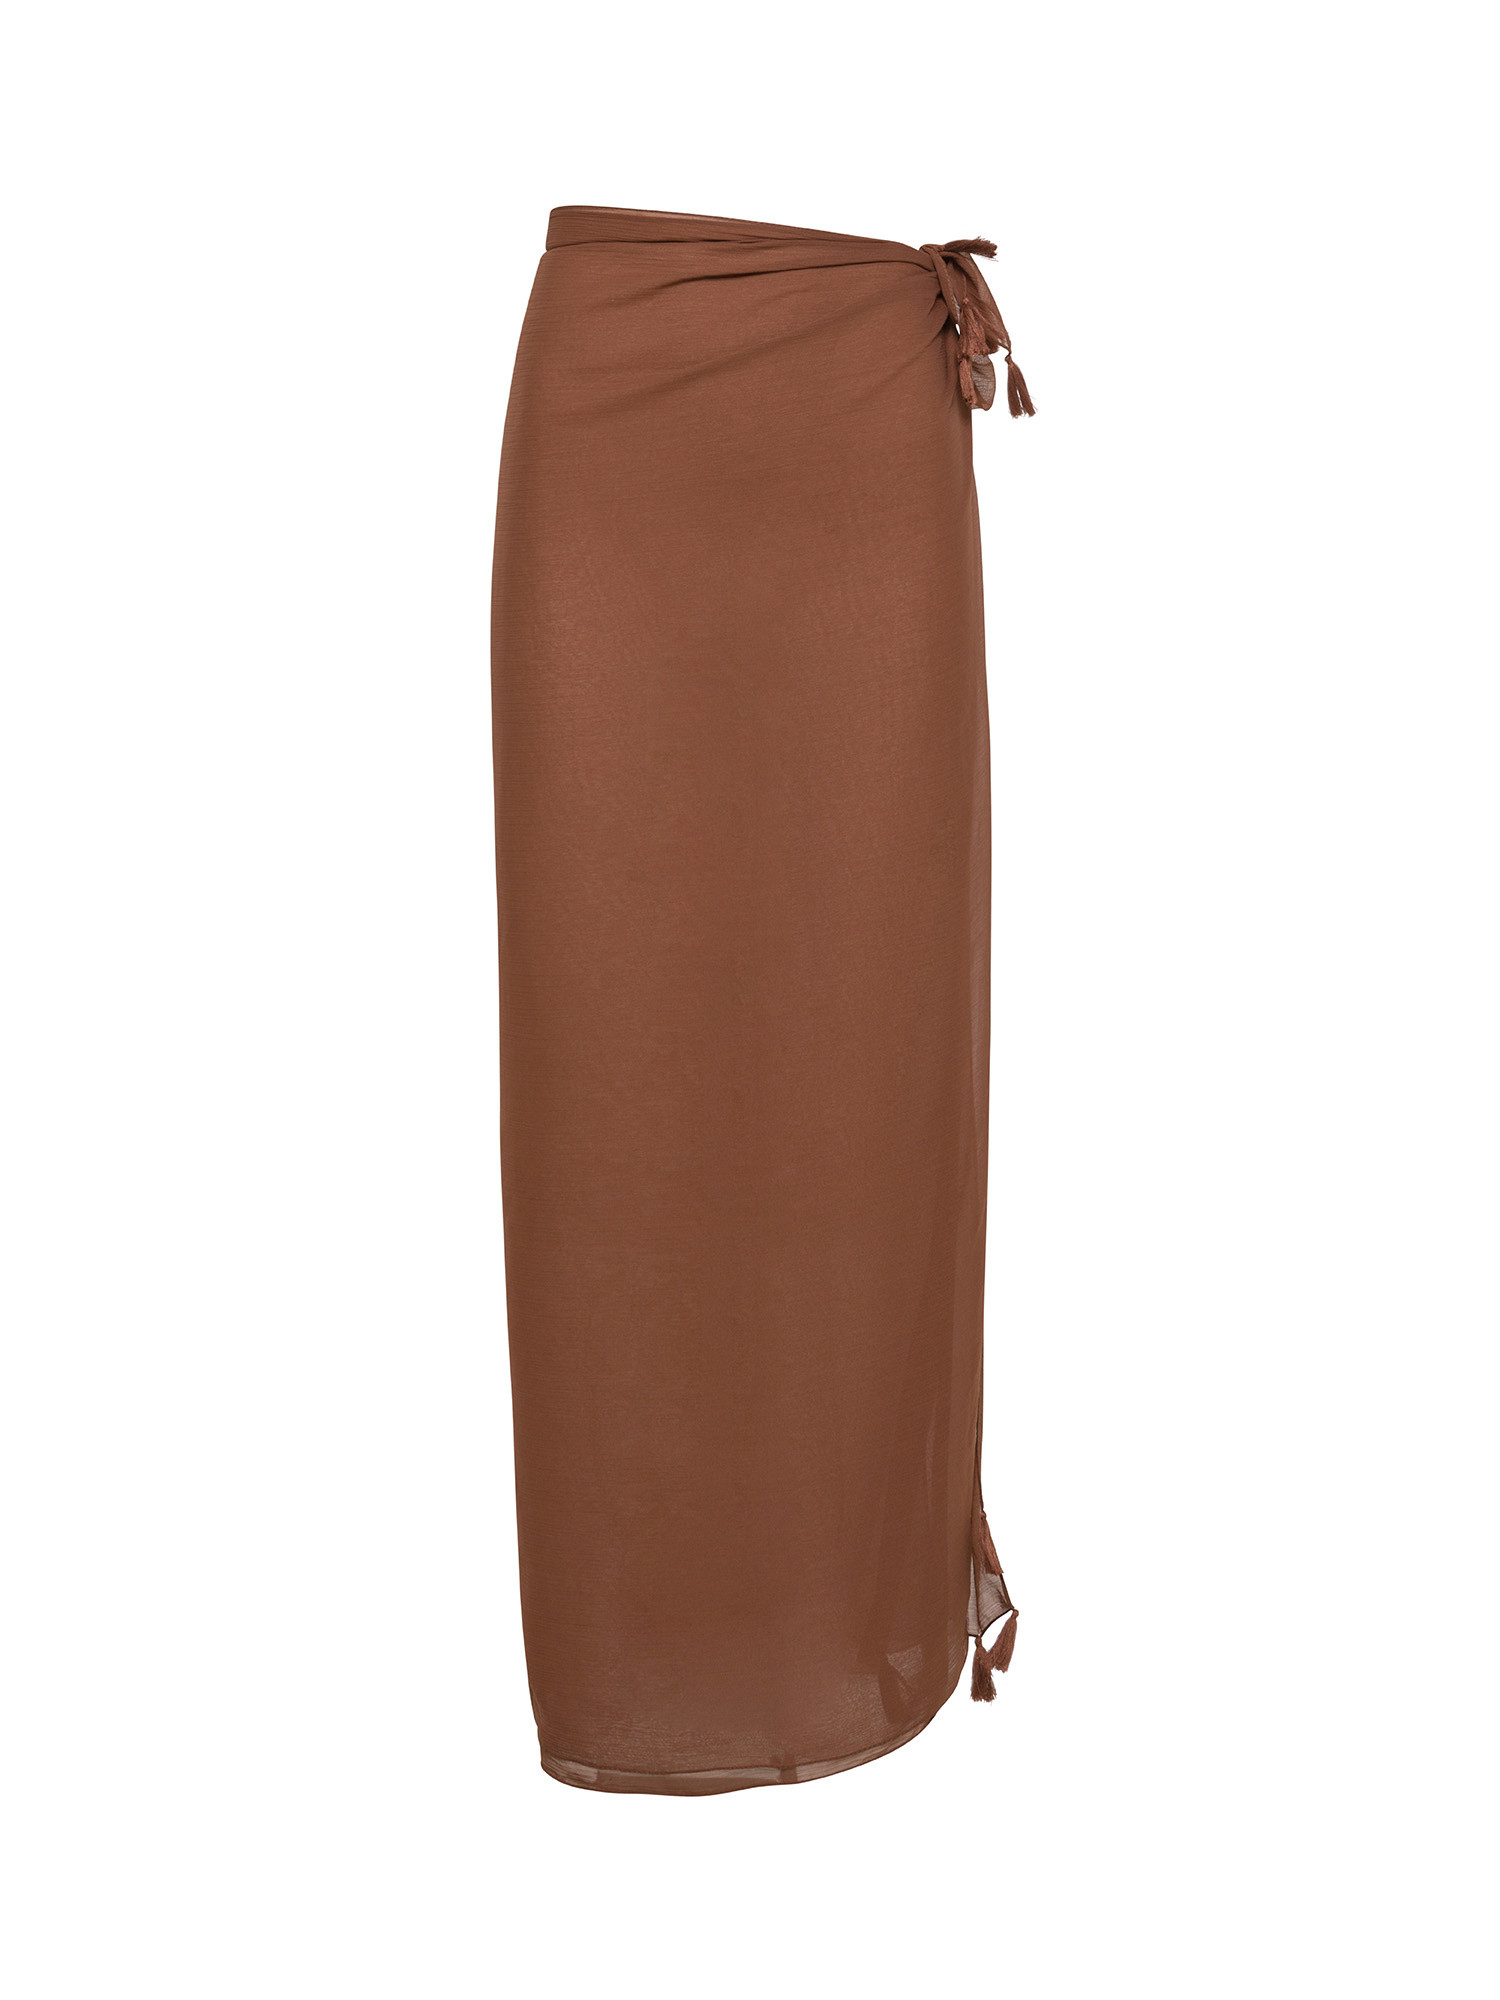 Koan - Chiffon pareo with tassels, Brown, large image number 0